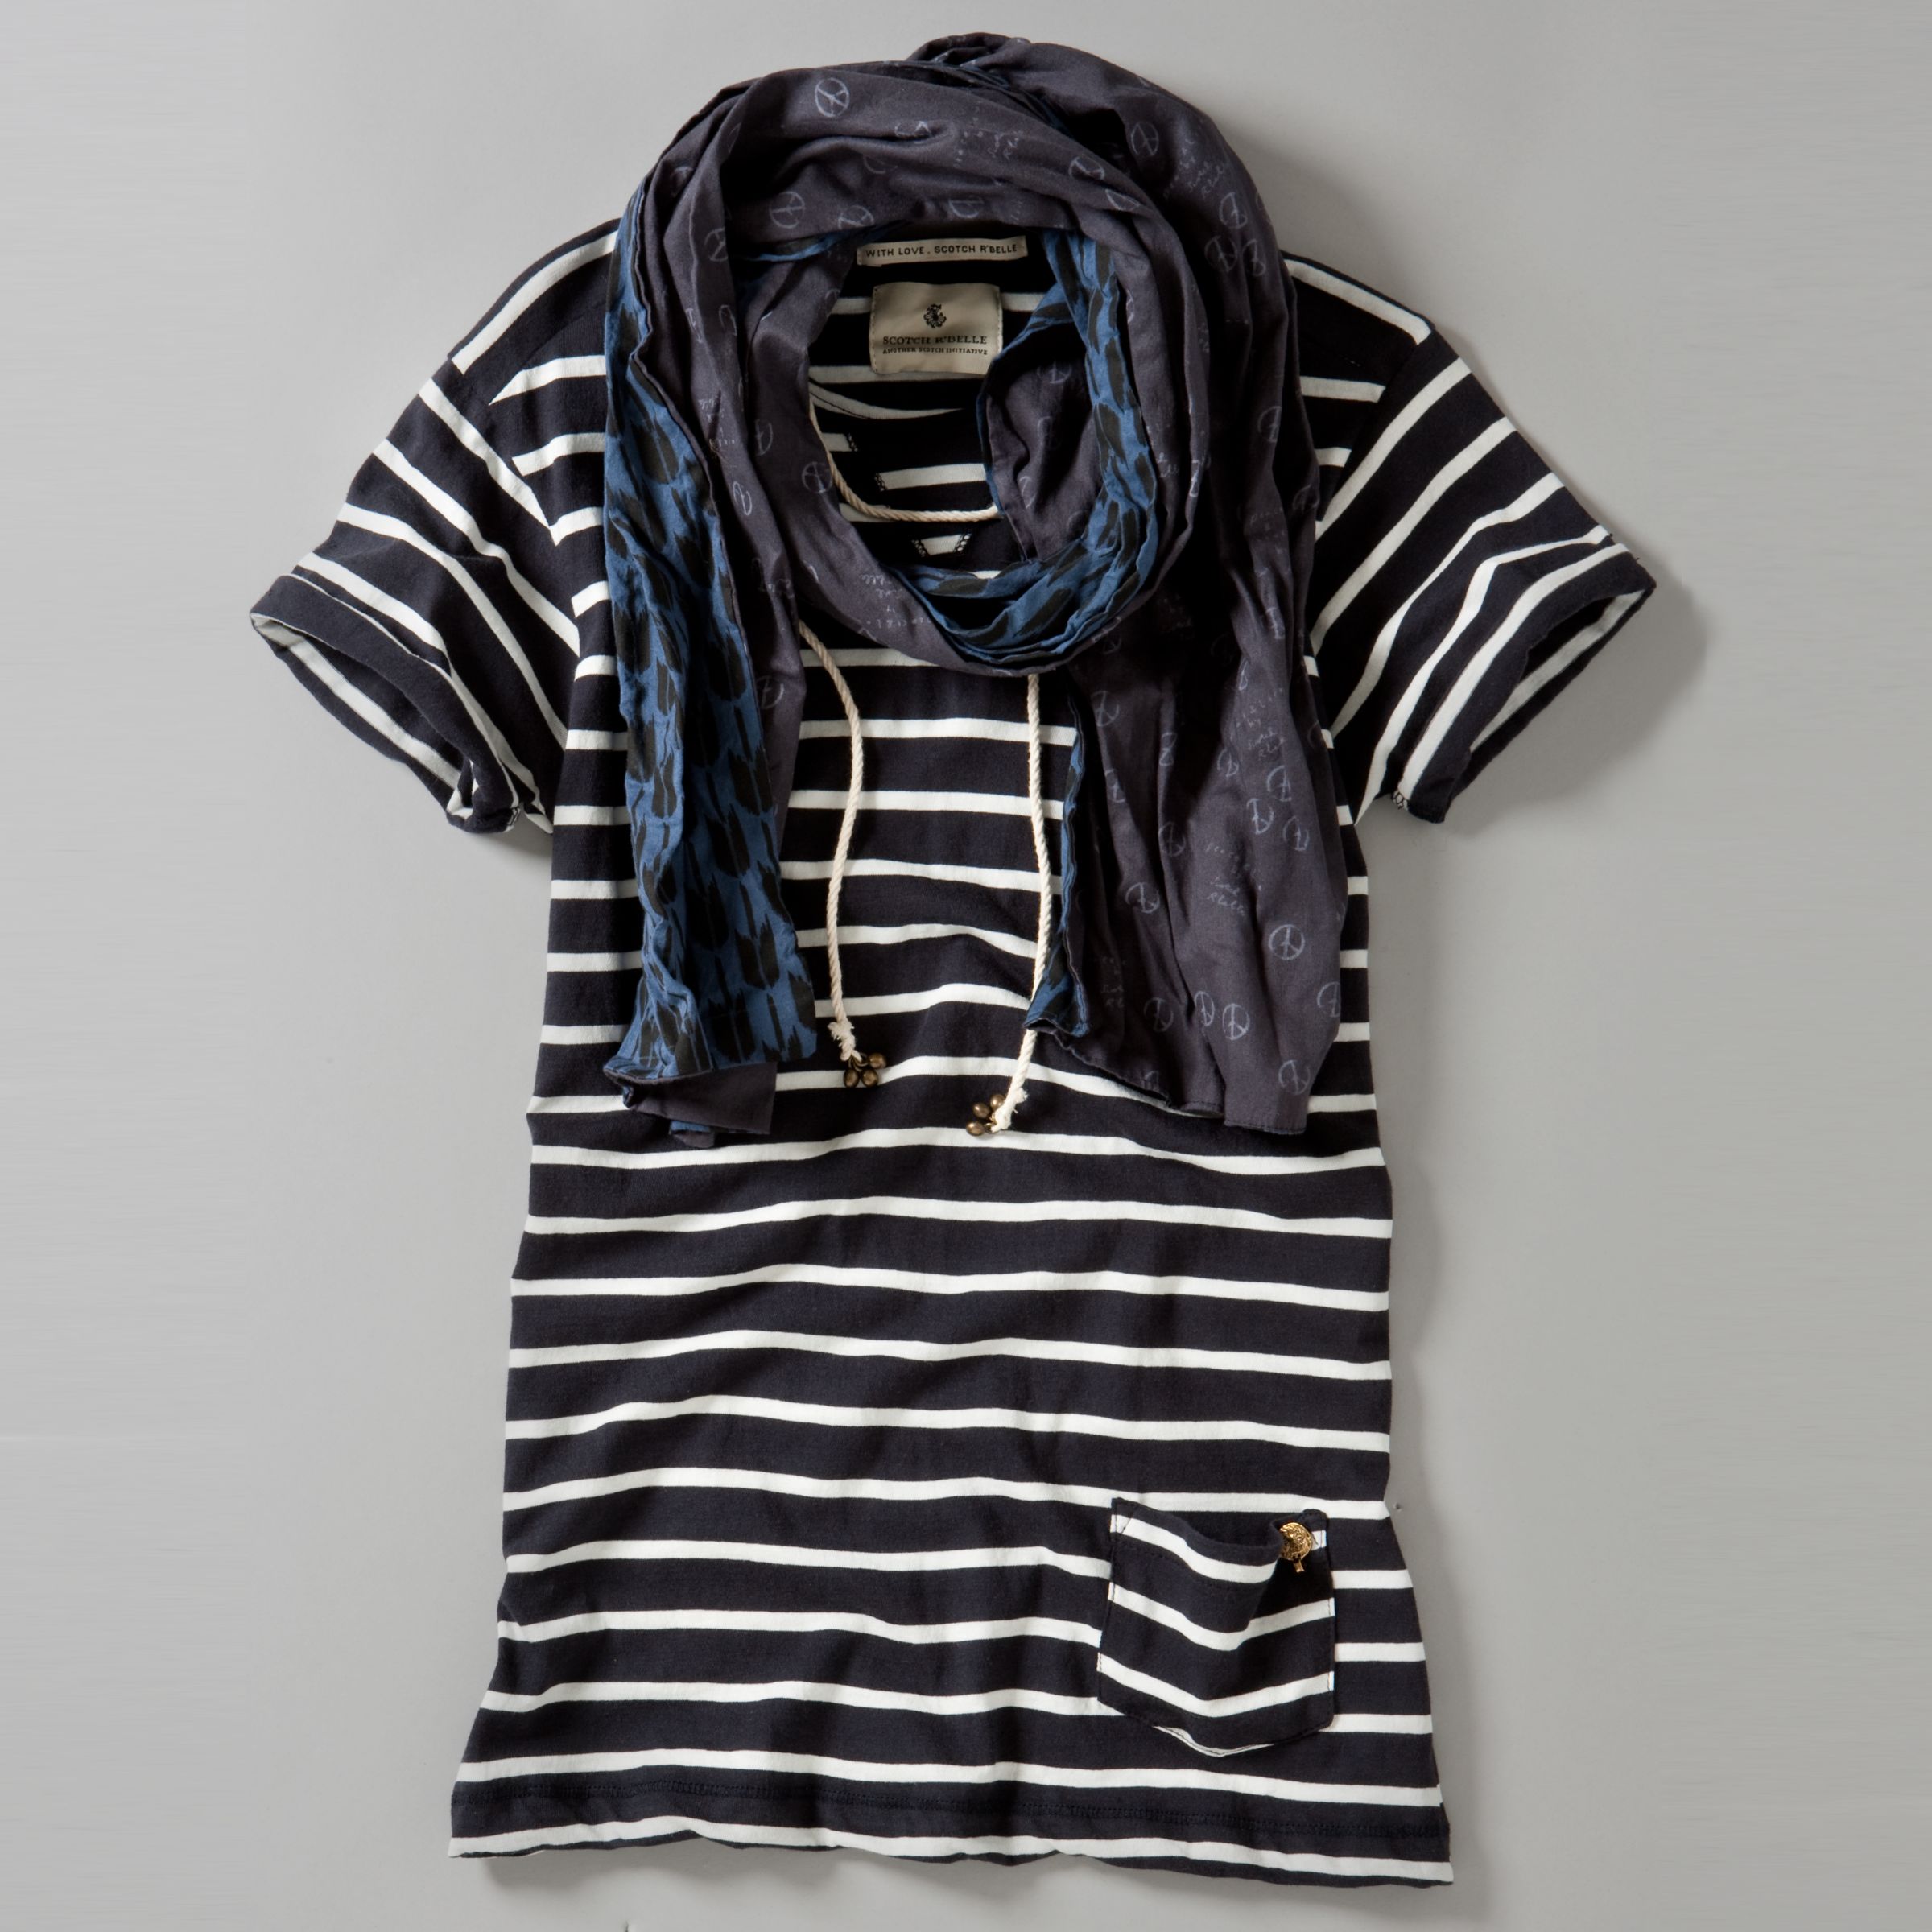 Stripe T-Shirt and Scarf,